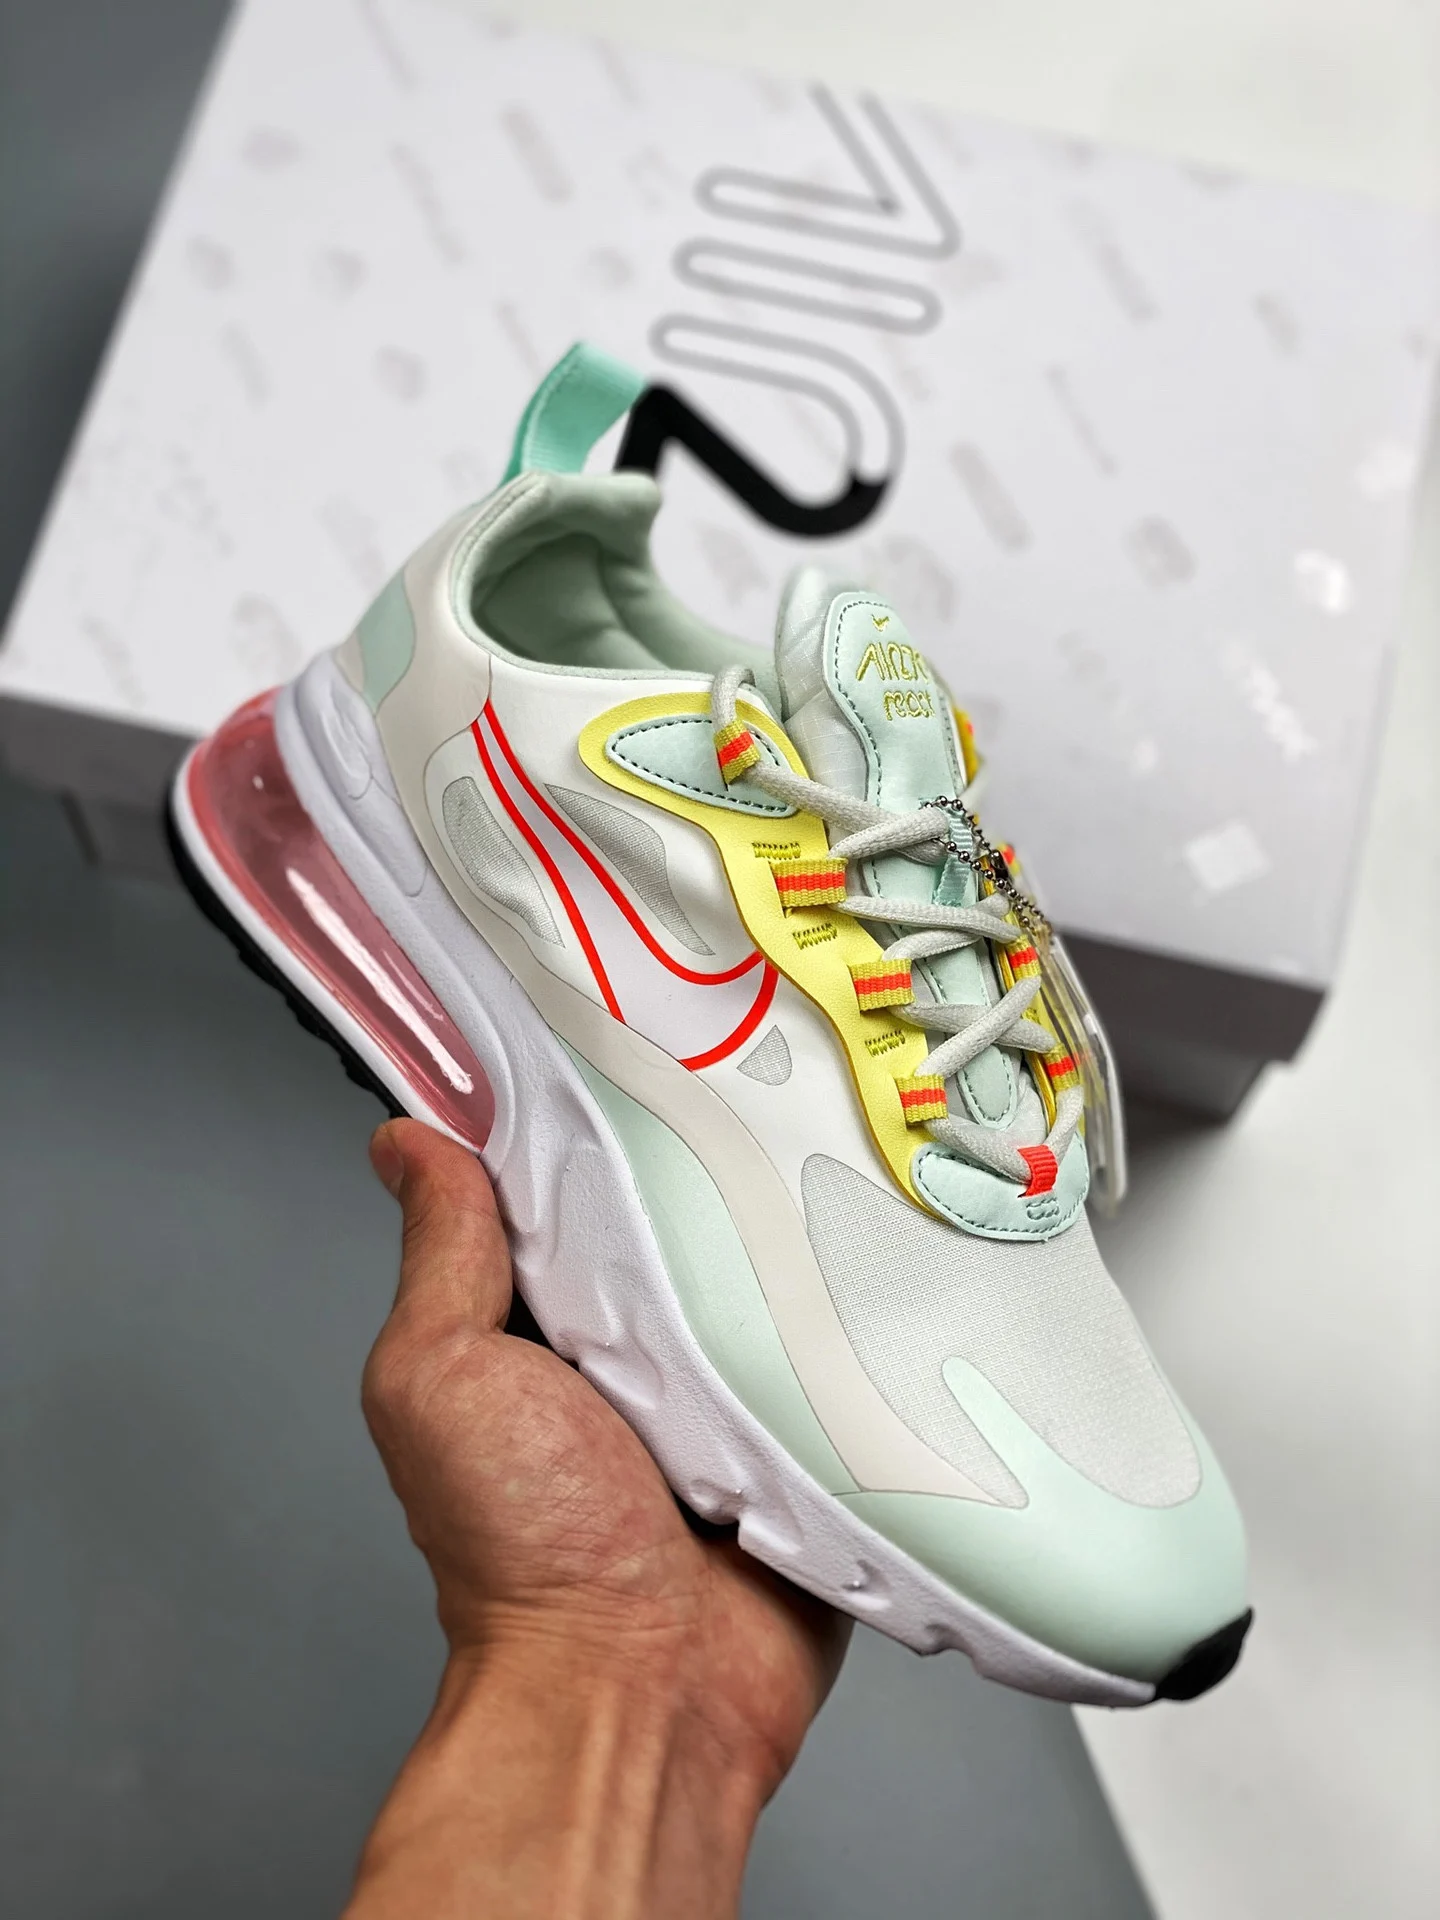 Nike Air Max 270 React Pale Ivory Barely Green Light Zitron White For Sale